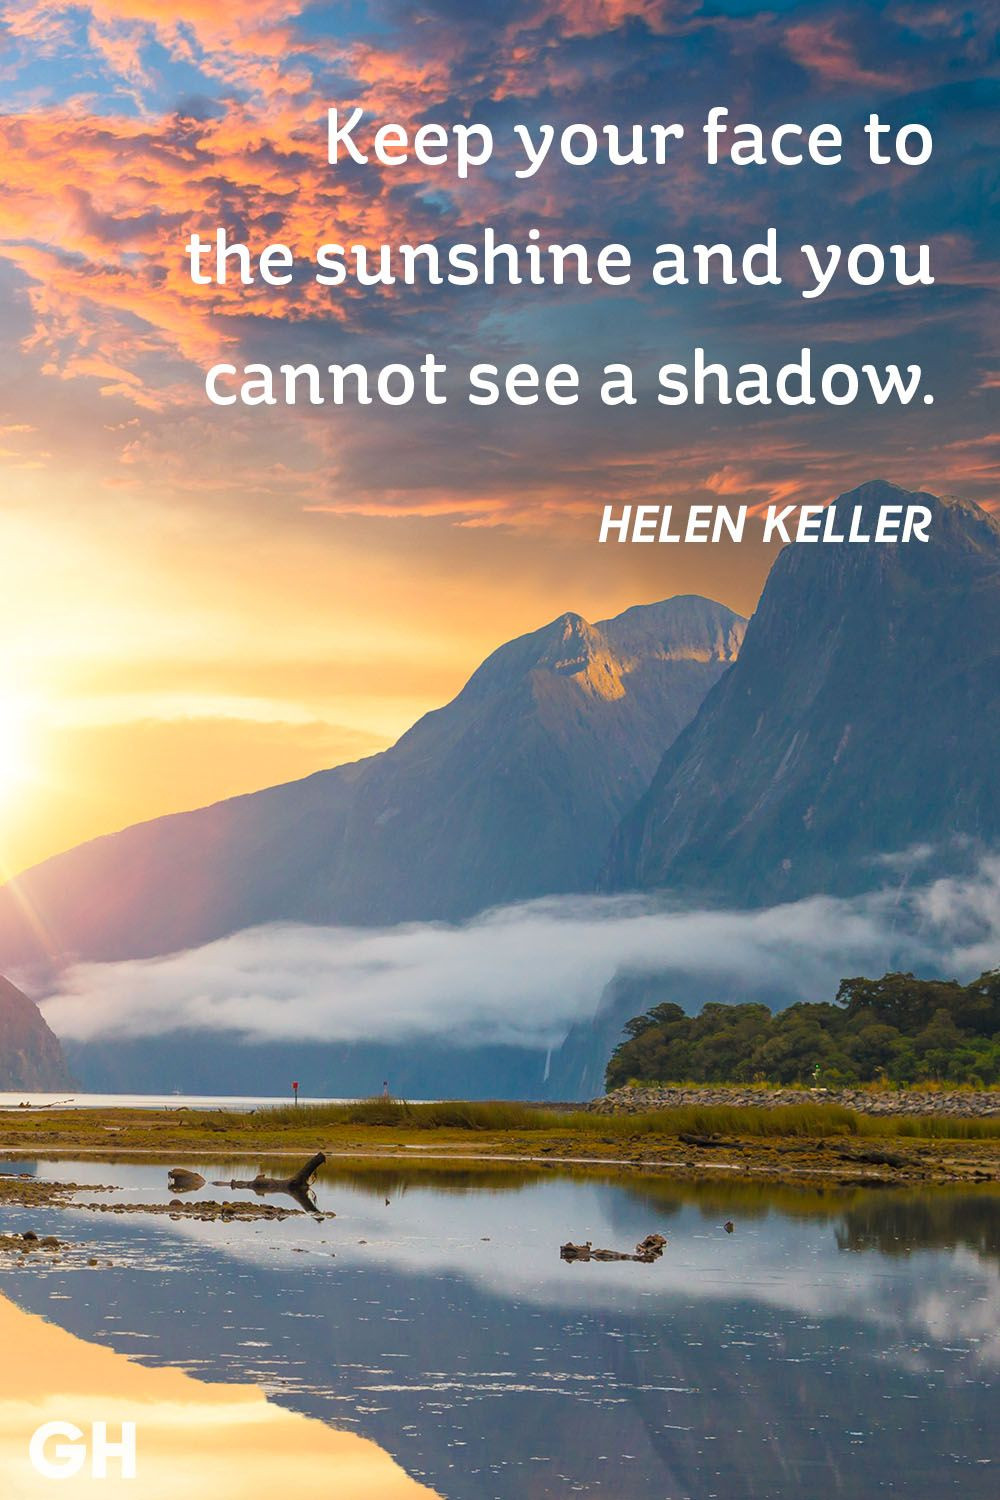 Motivational Images And Quotes
 Inspirational Quotes Helen Keller – AtoZMom s Blog